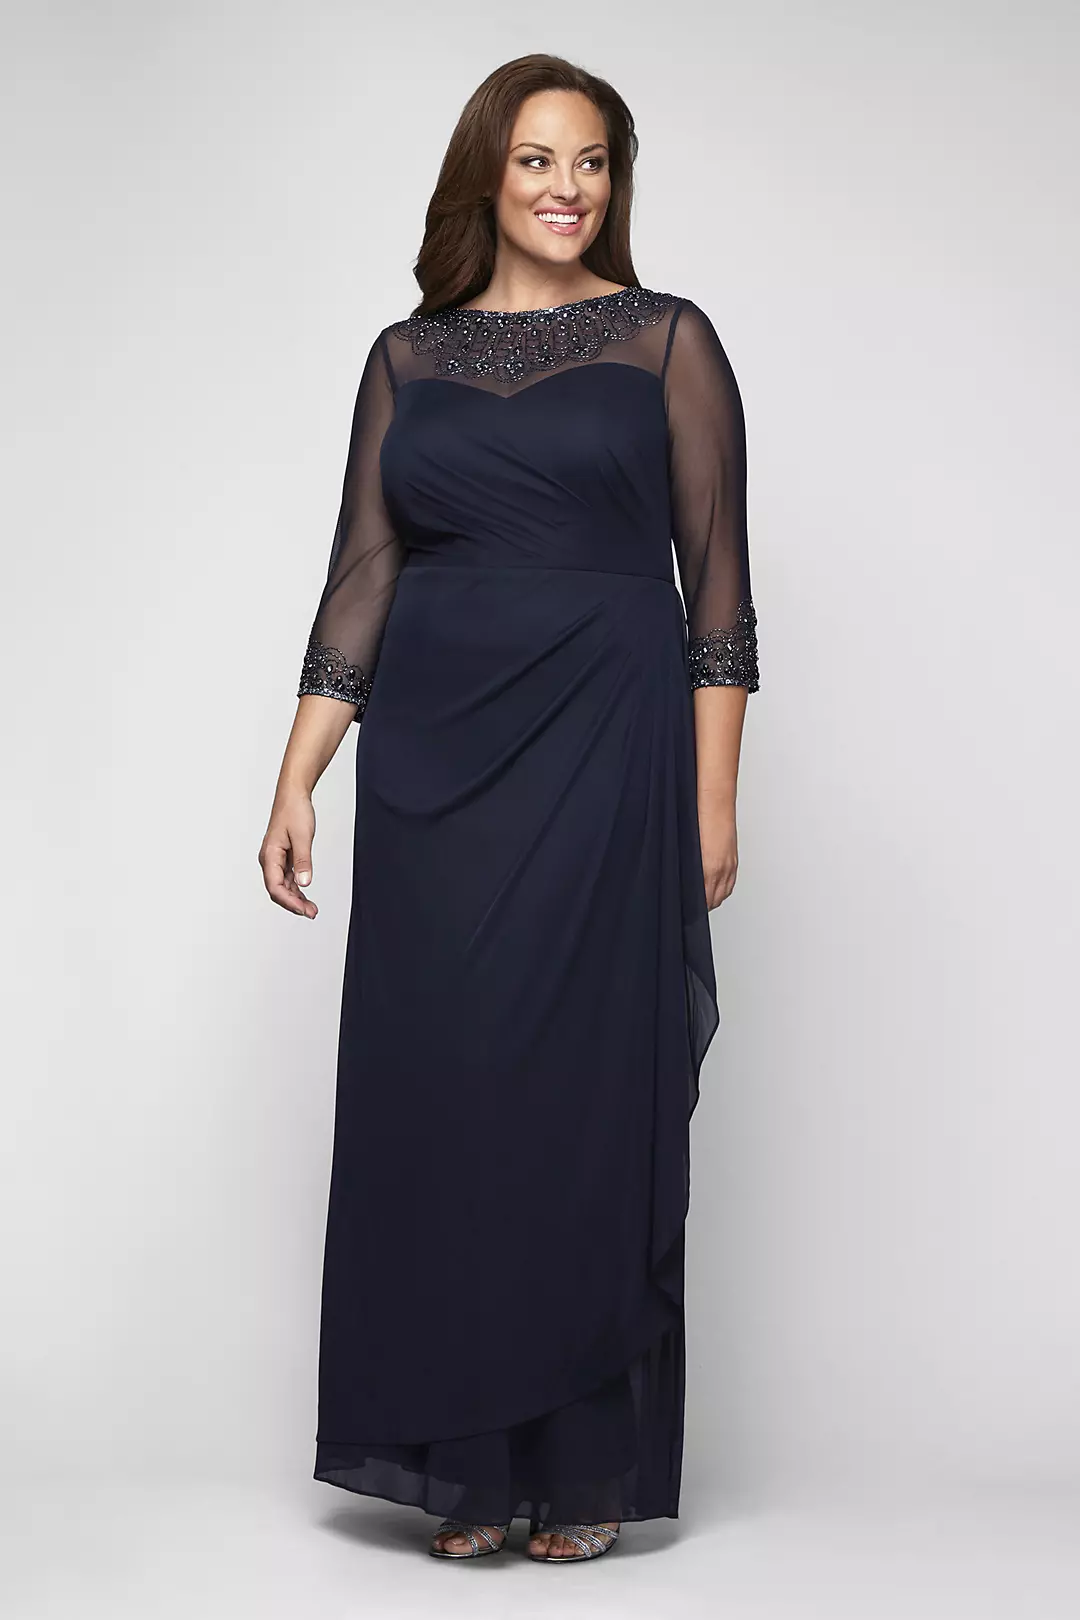 Beaded Illusion 3/4 Sleeve Mesh Plus Size Gown Image